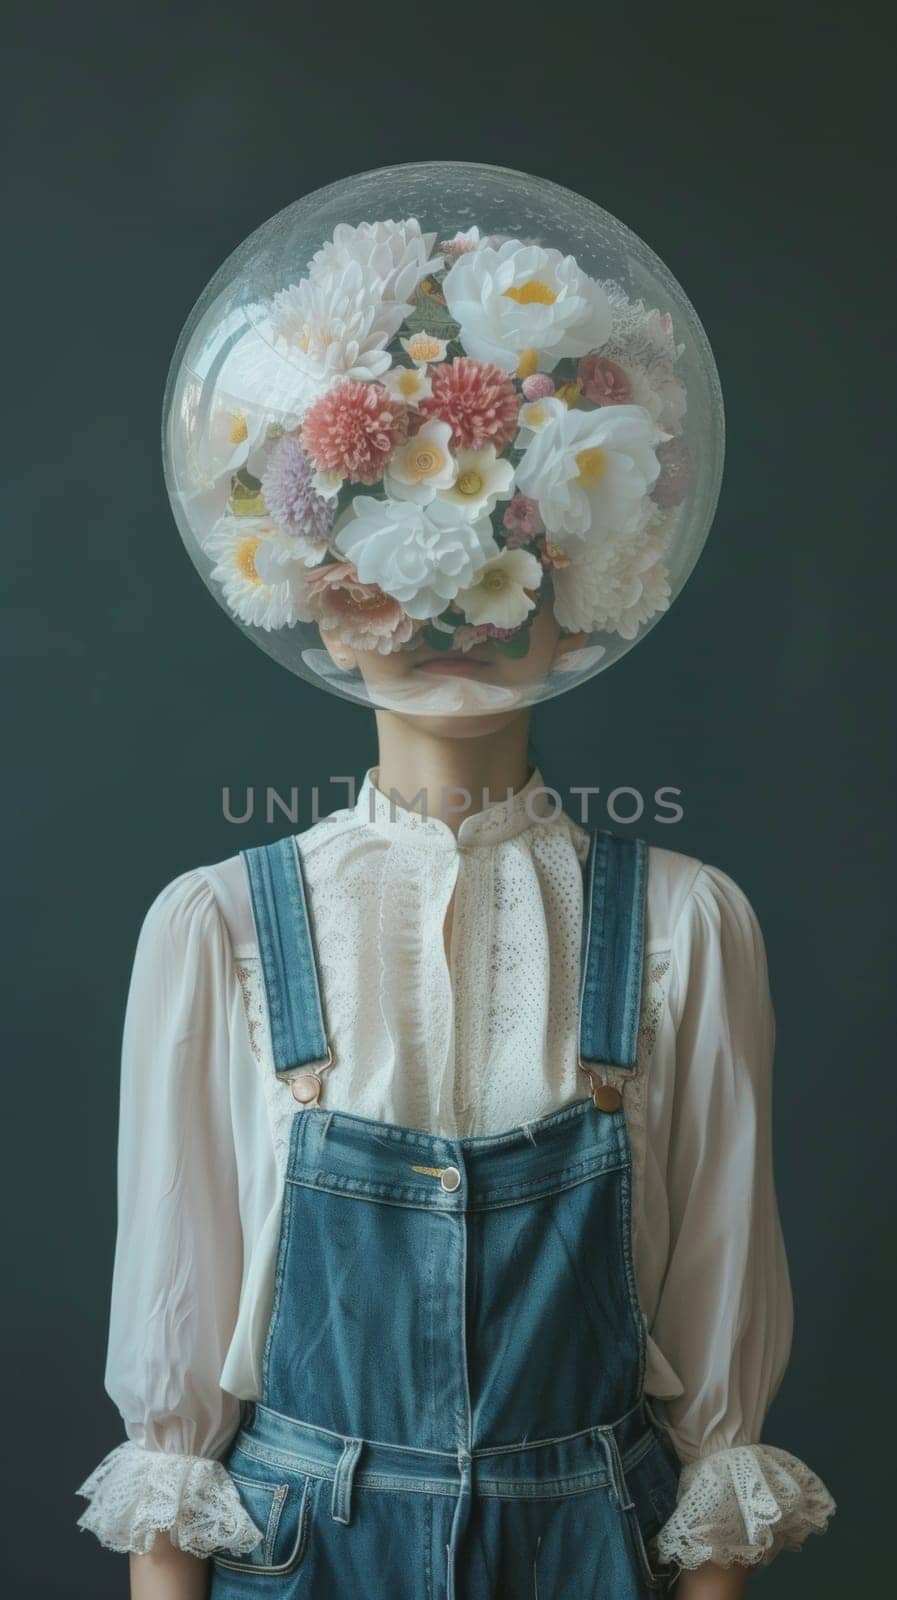 Woman Wearing Overalls and Soap Bubble with Flowers Instead of a Head by Anastasiia